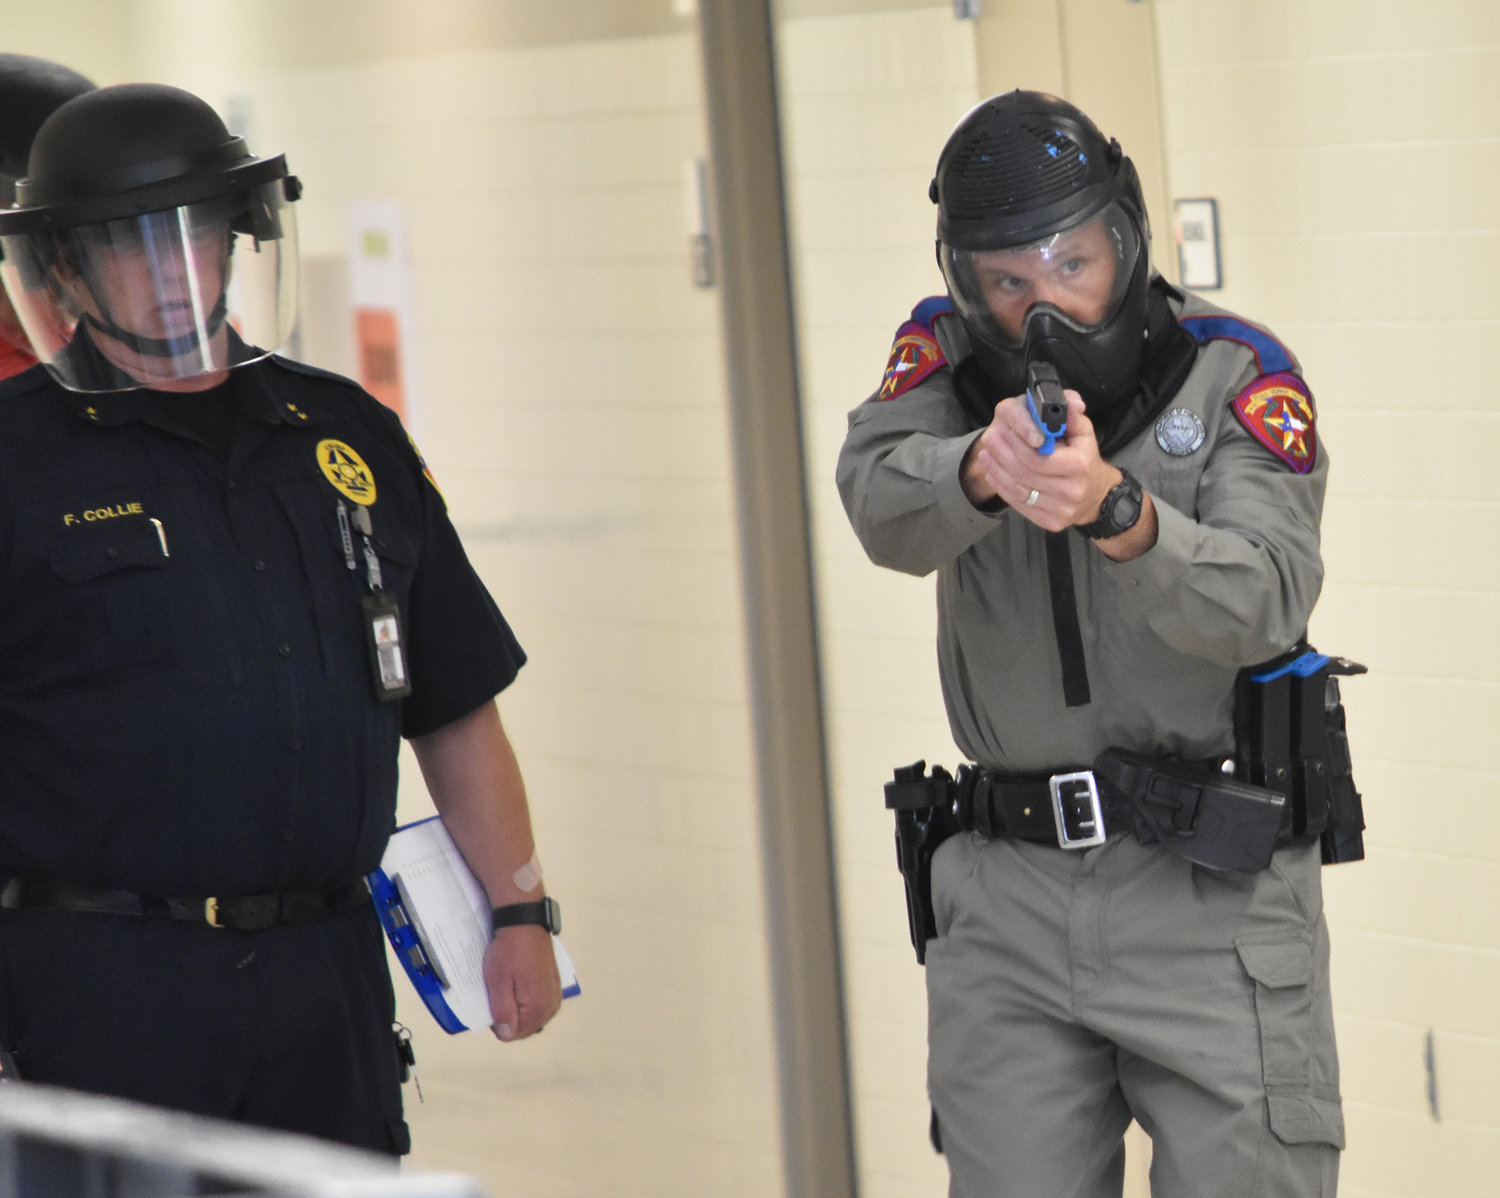 Aledo ISD Police Officer Cliff Boltwood works through a scenario with coaching by Aledo ISD Police CHief Fred Collie.